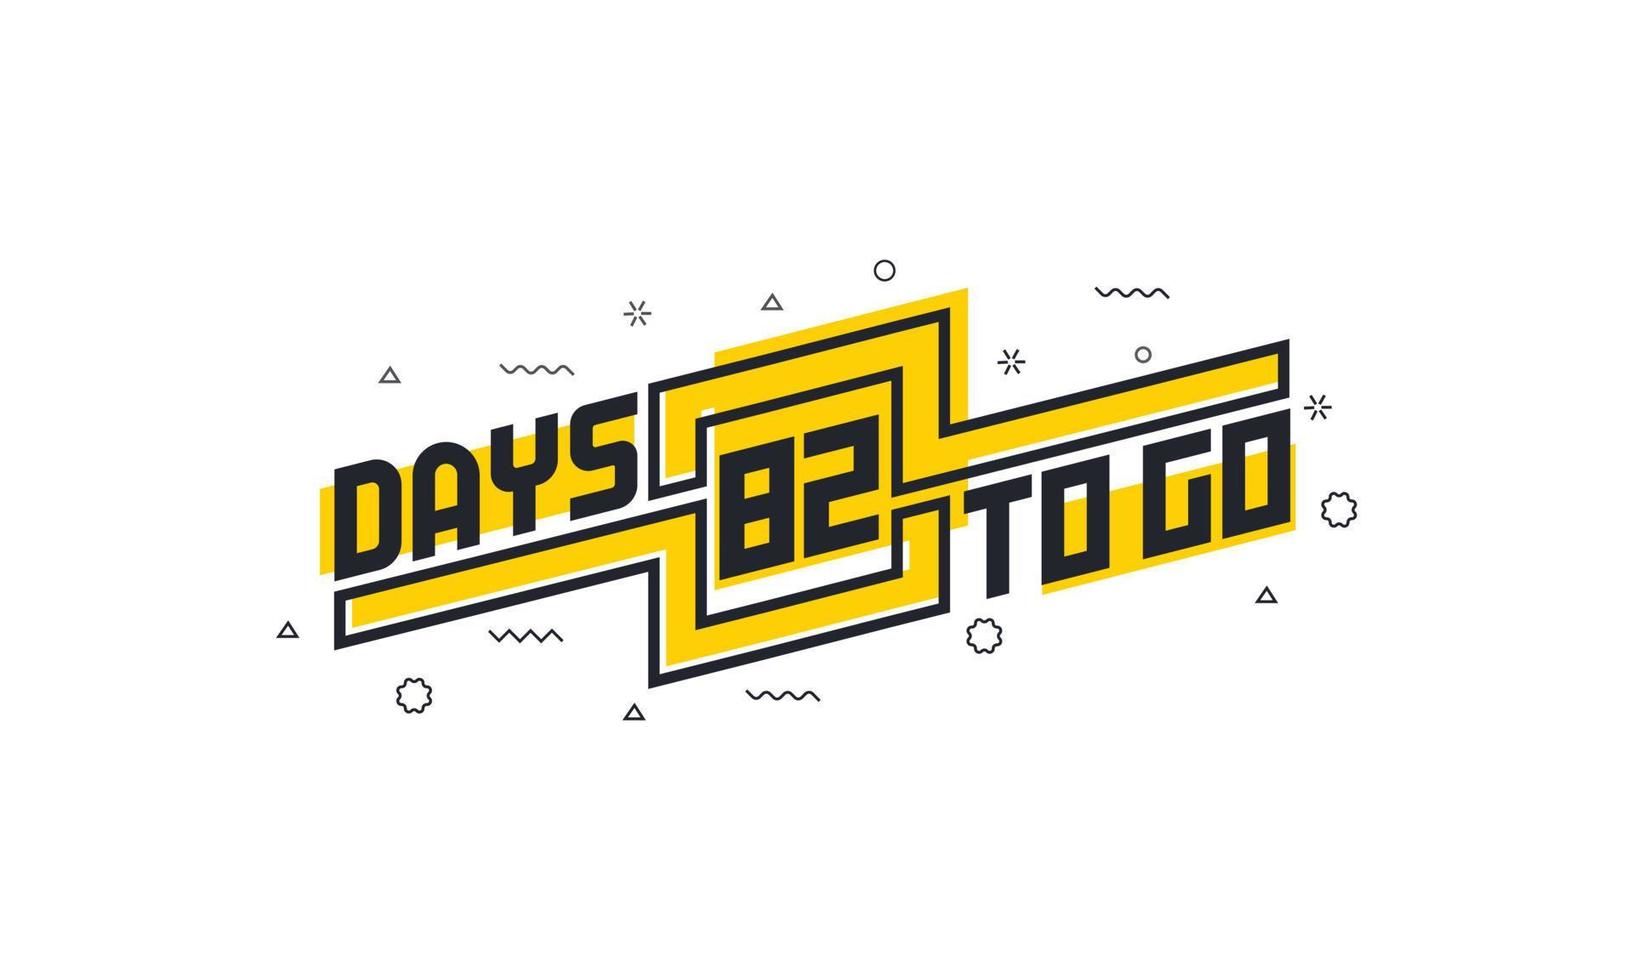 82 days to go countdown sign for sale or promotion. vector